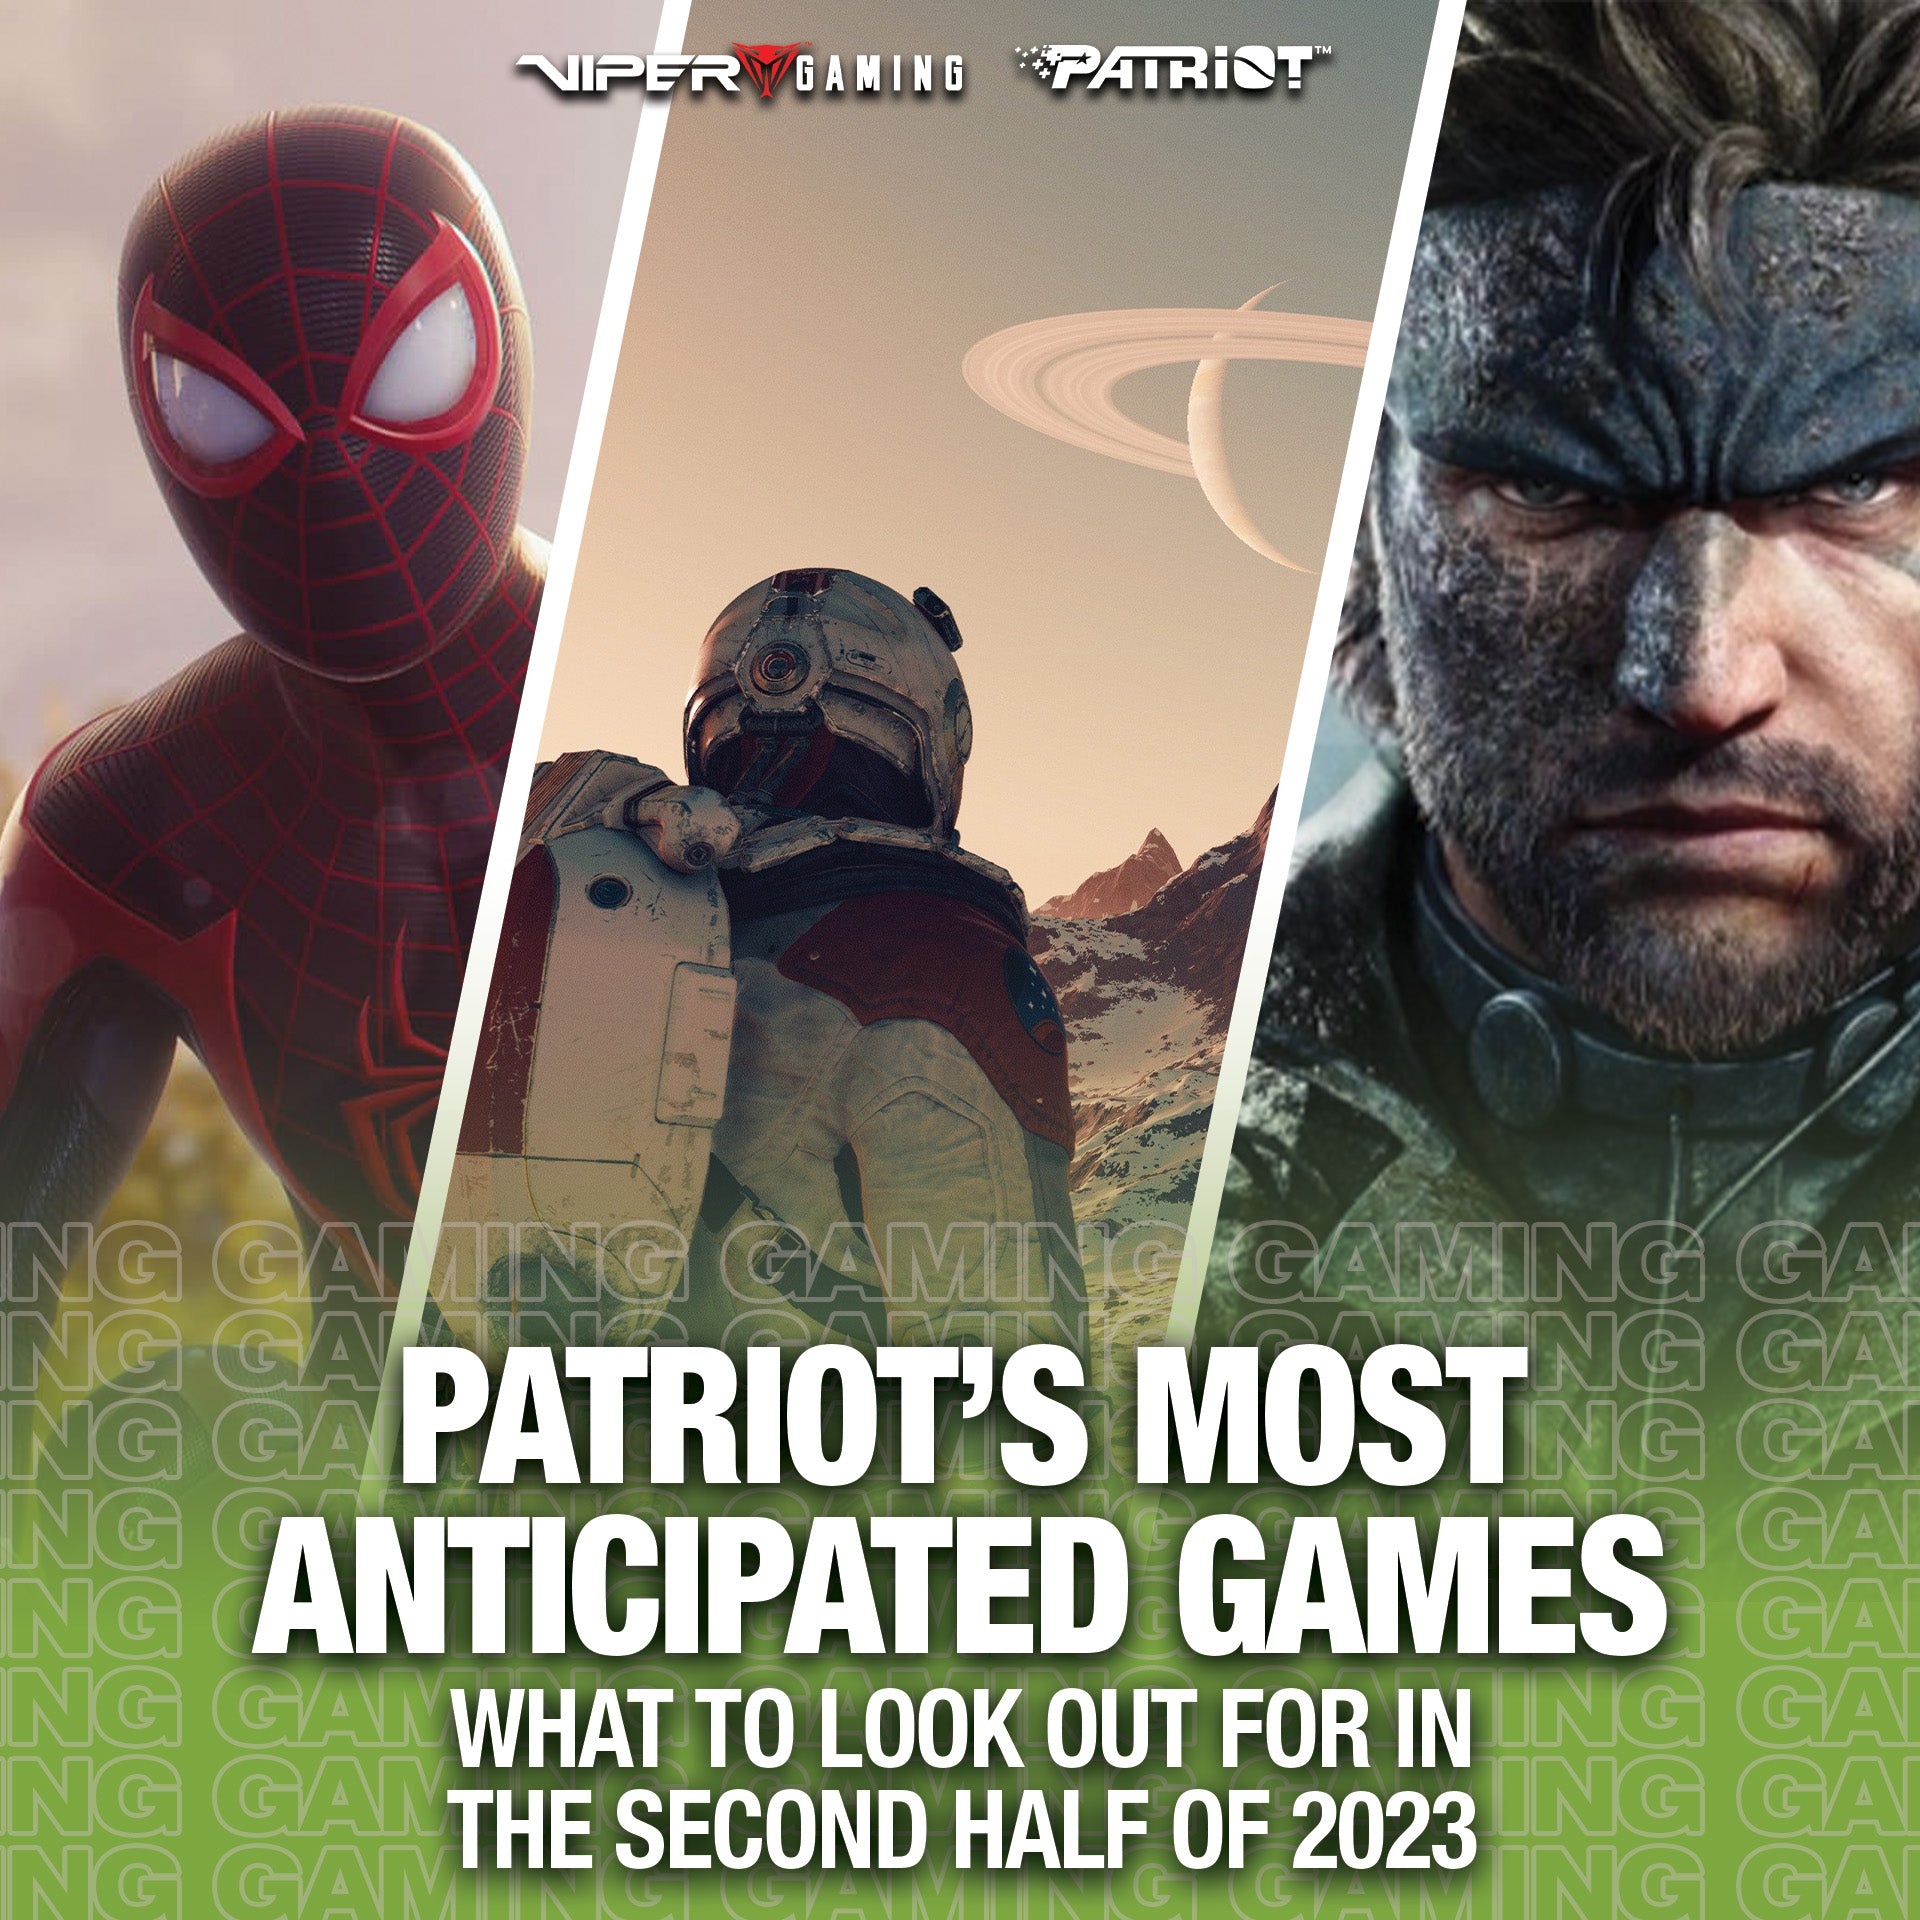 Patriot's Most Anticipated Games in the Second Half of 2023